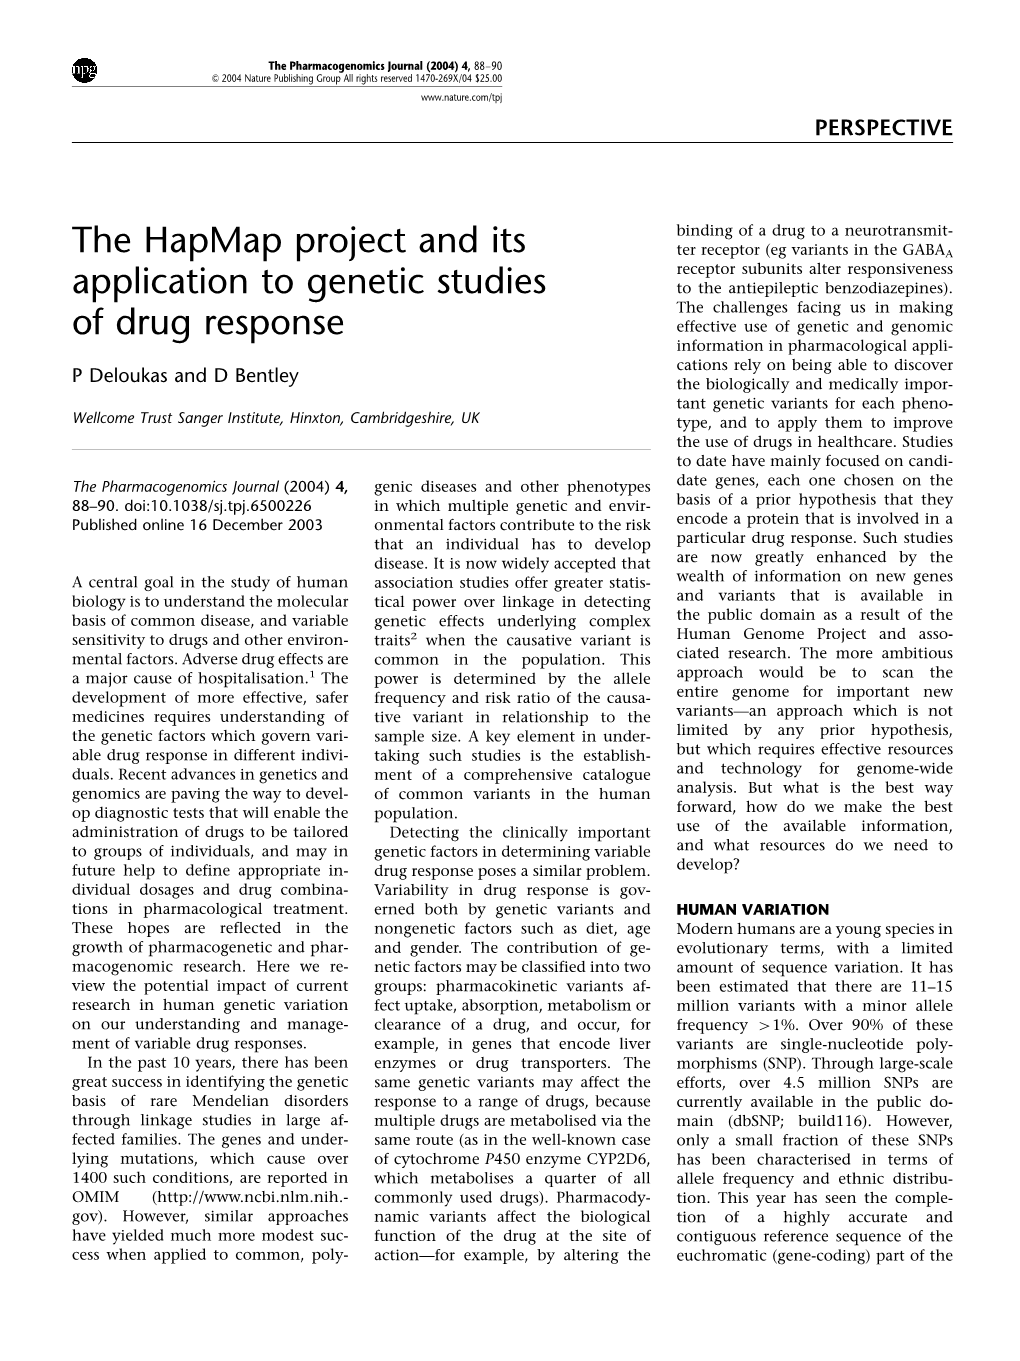 The Hapmap Project and Its Application to Genetic Studies Of